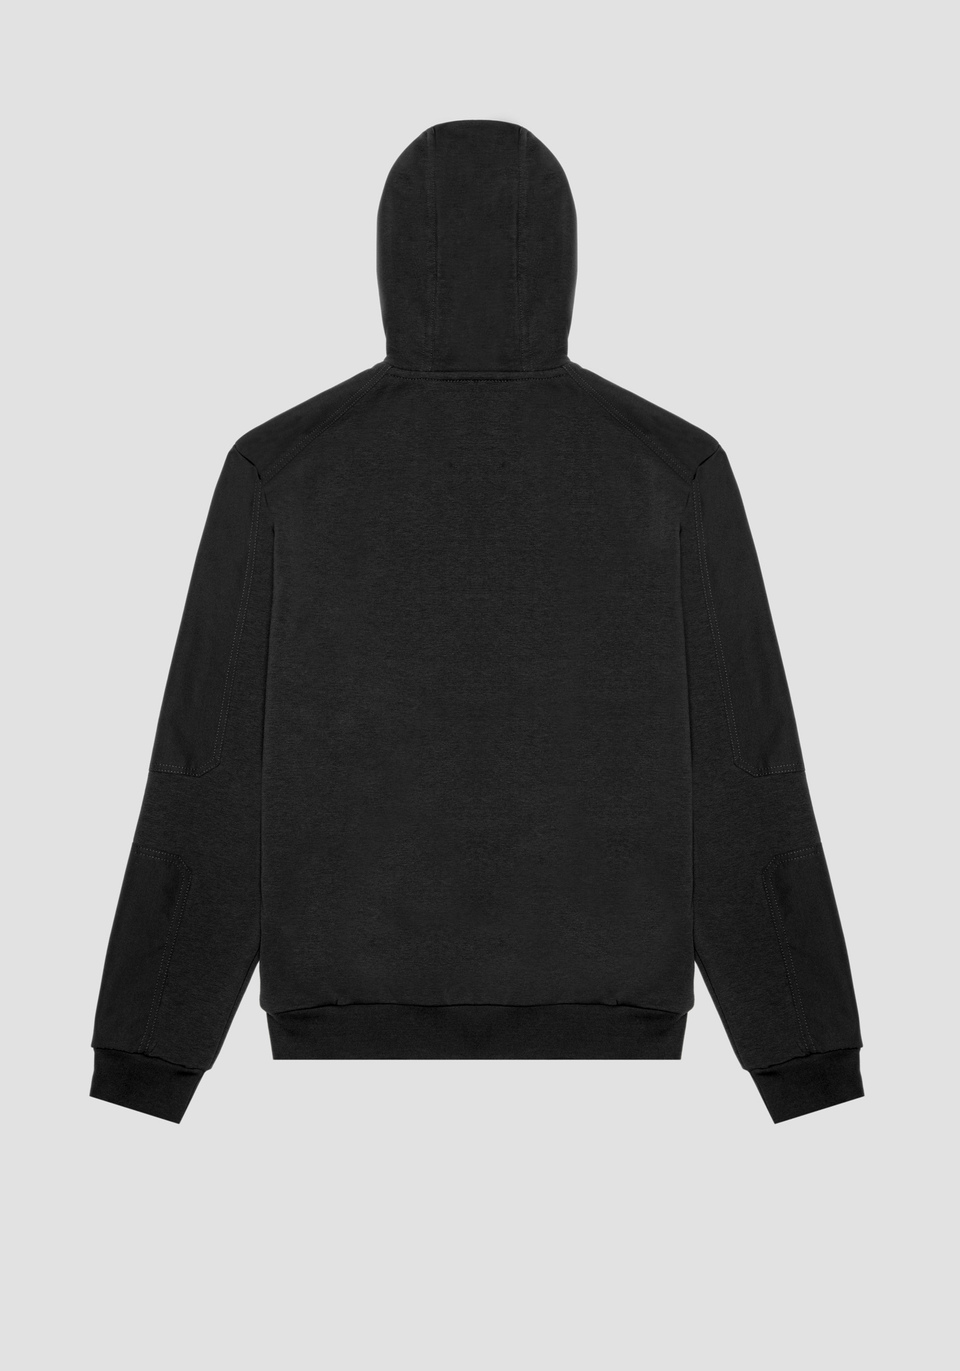 REGULAR FIT SWEATSHIRT IN SOLID COLOUR STRETCH COTTON-BLEND WITH HOOD AND TONE-ON-TONE PATCH - Antony Morato Online Shop